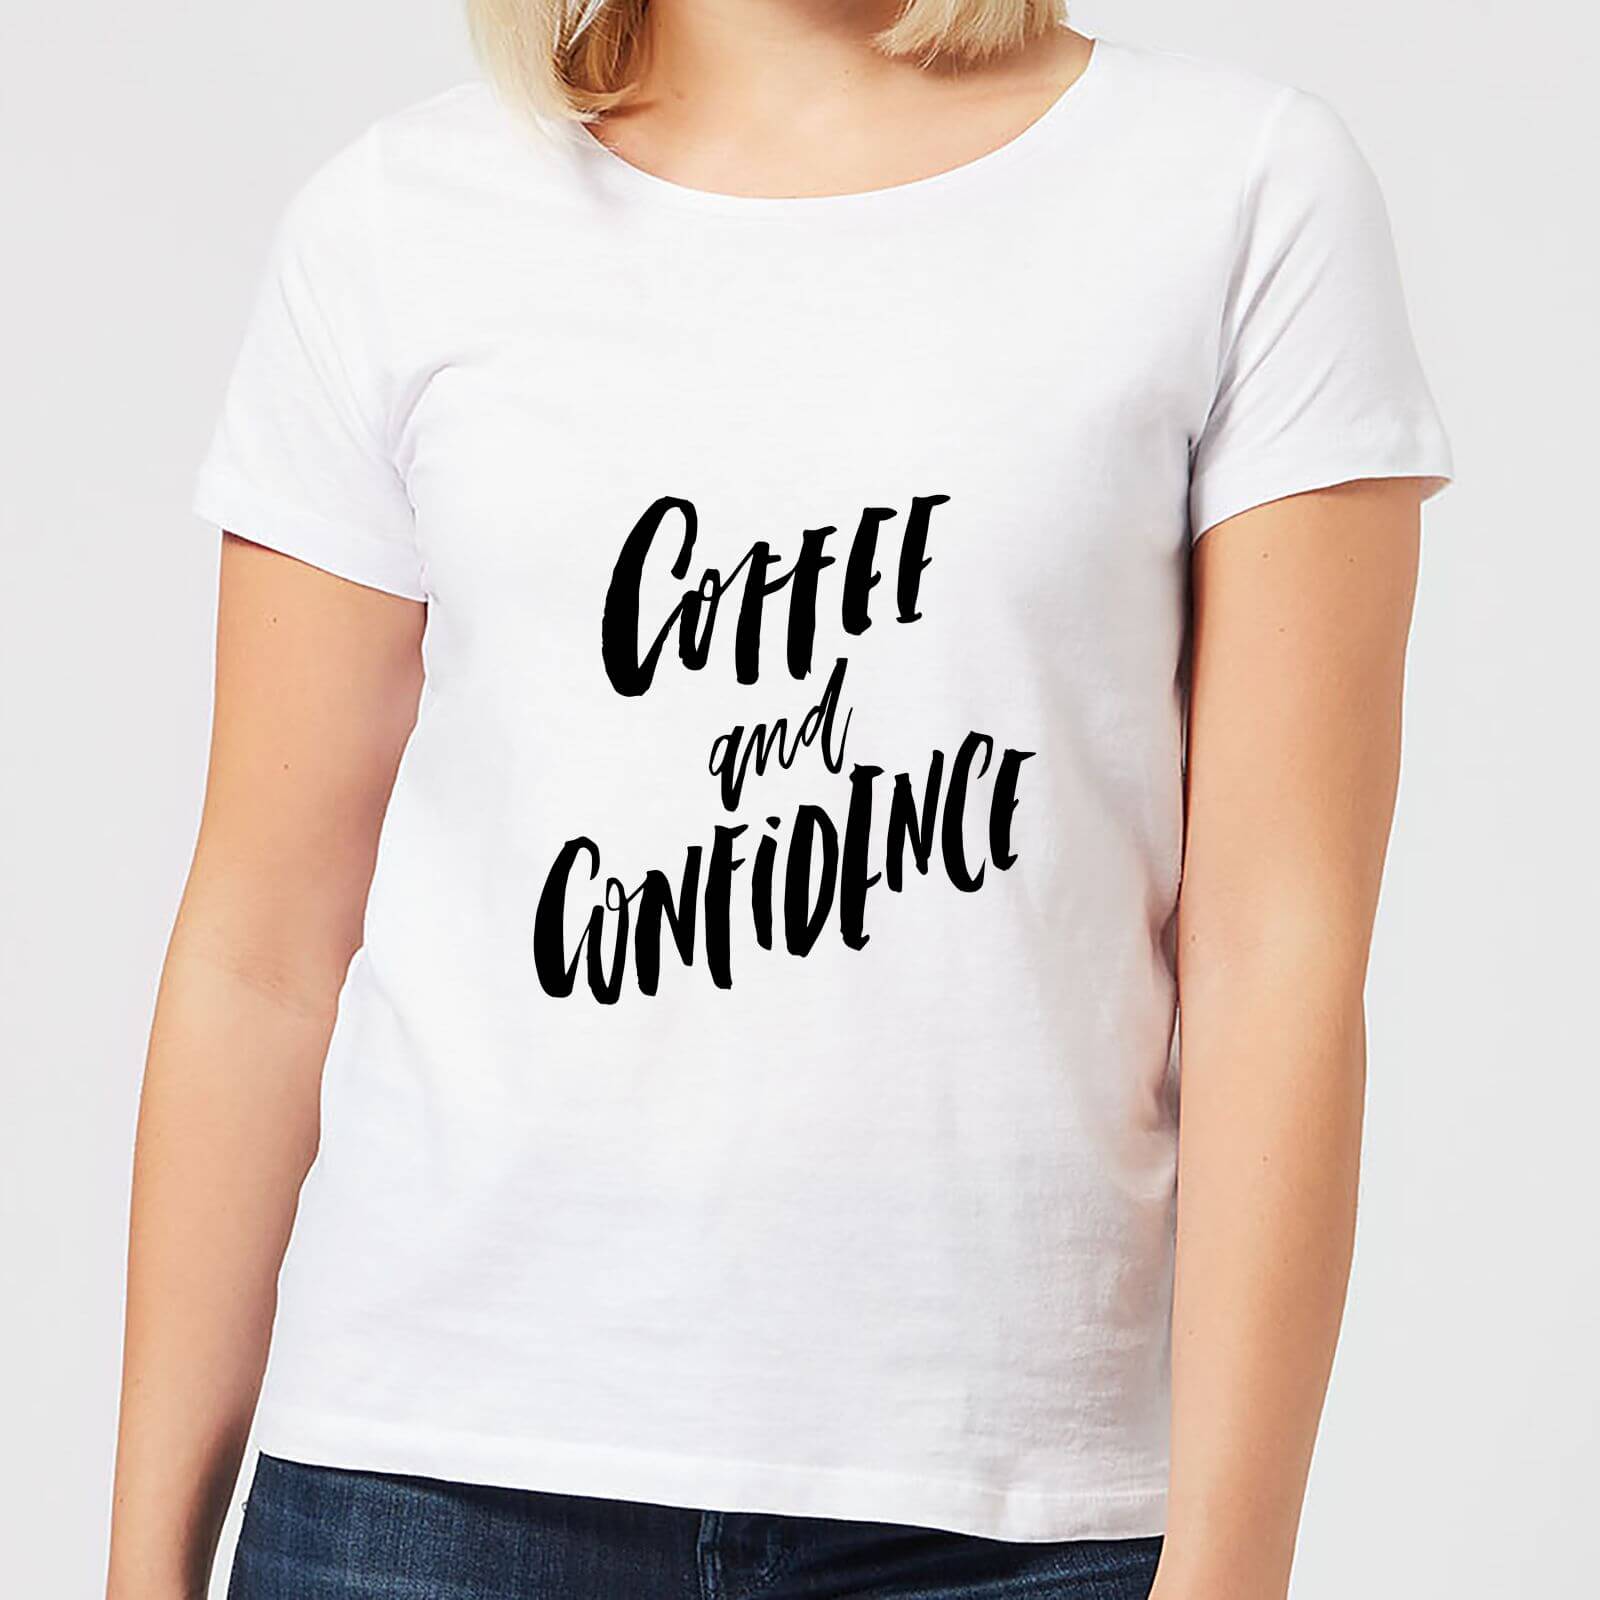 Coffee and Confidence Women's T-Shirt - White - L - White